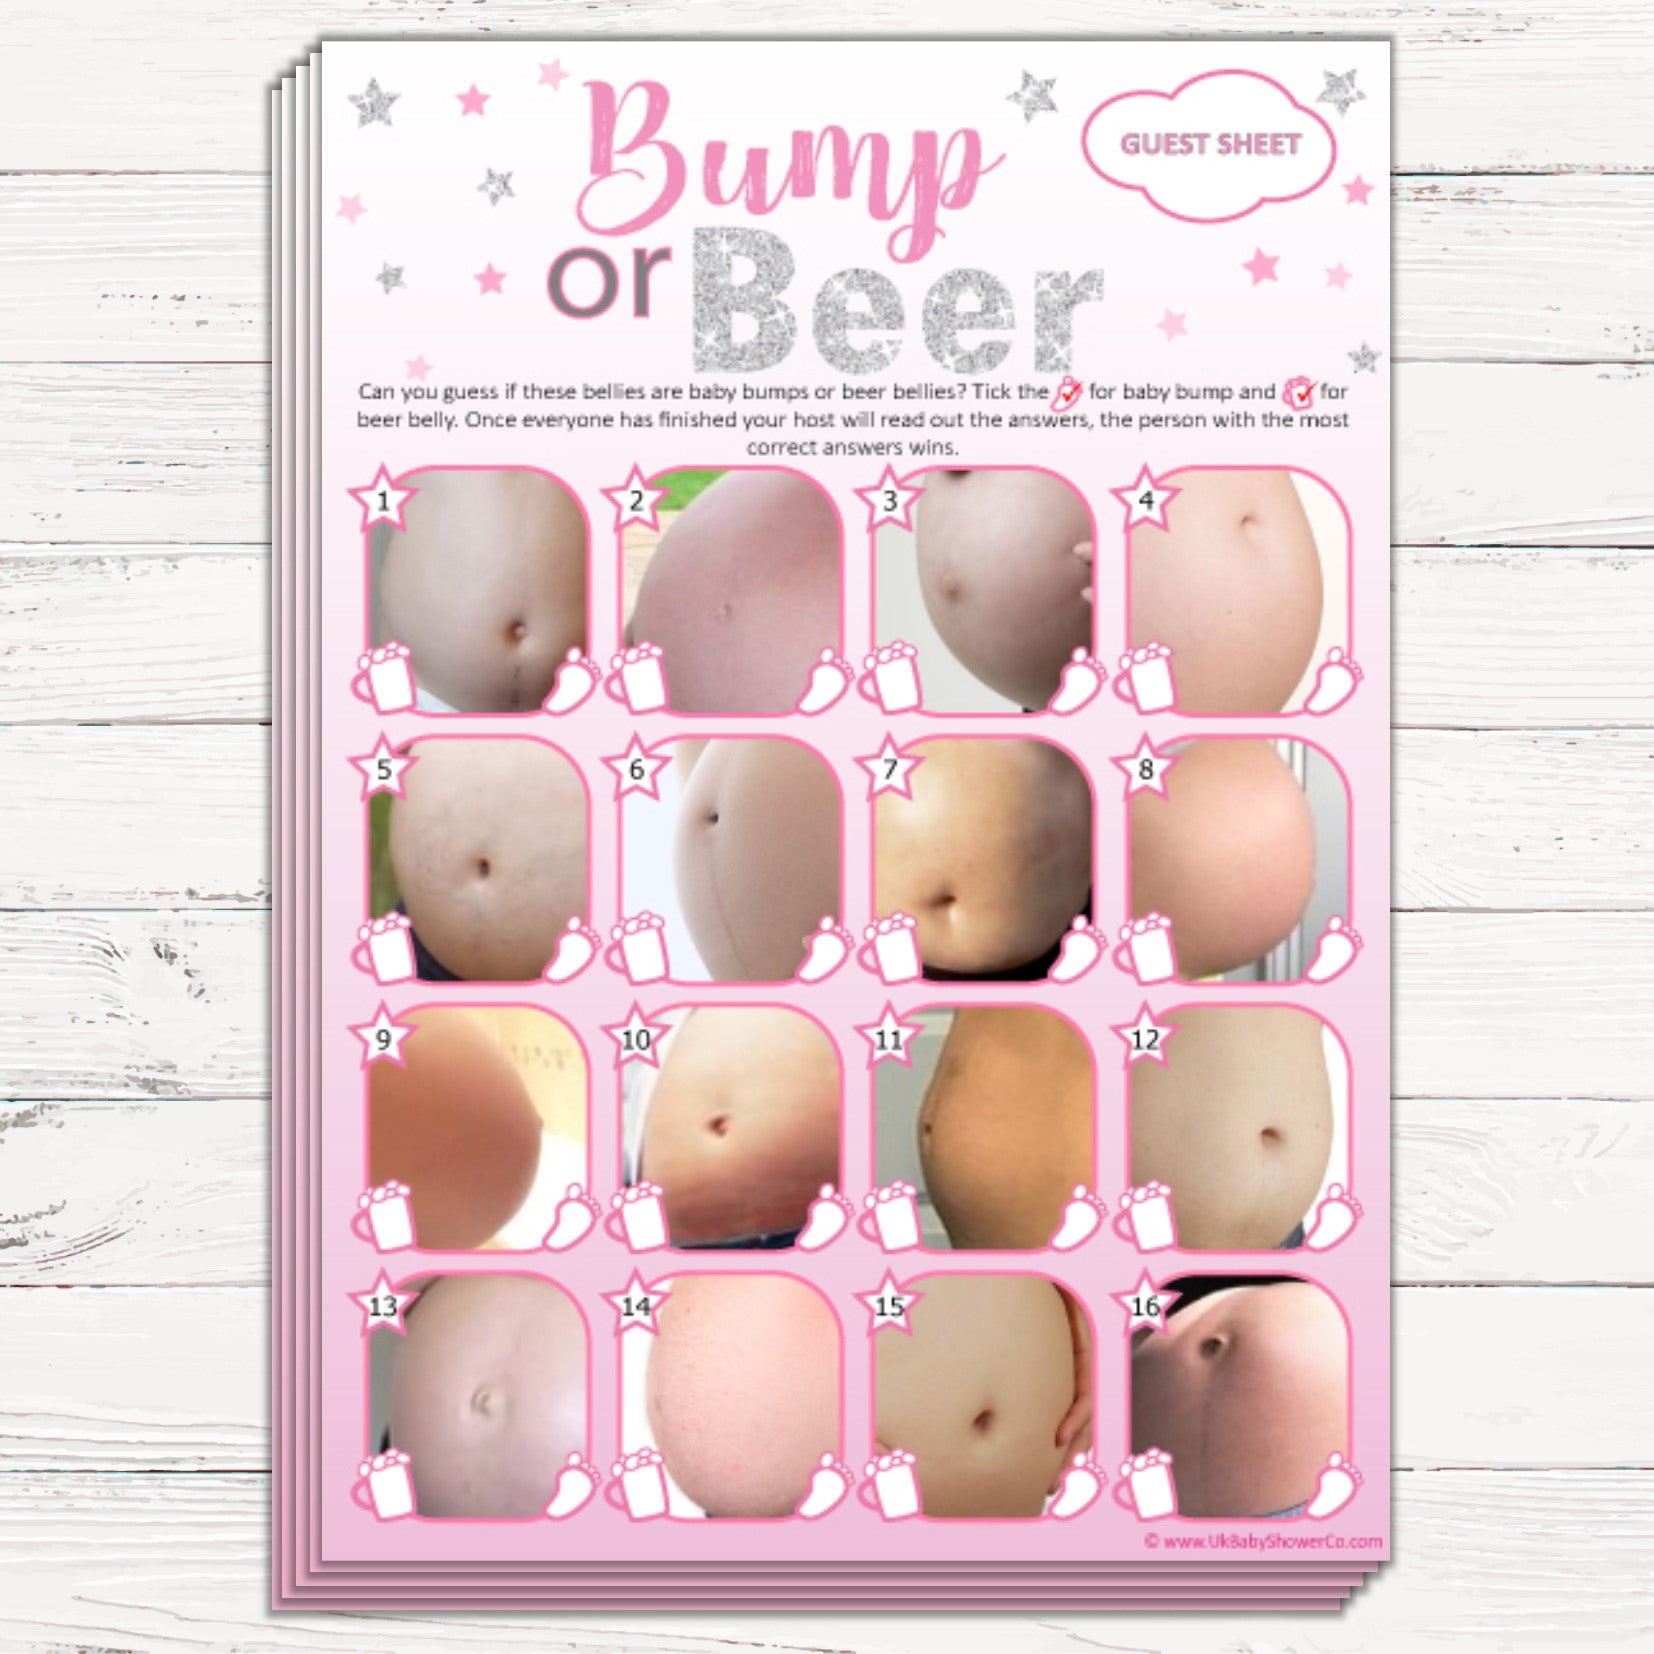 Bump or Beer Party Game - Uk Baby Shower Co ltd